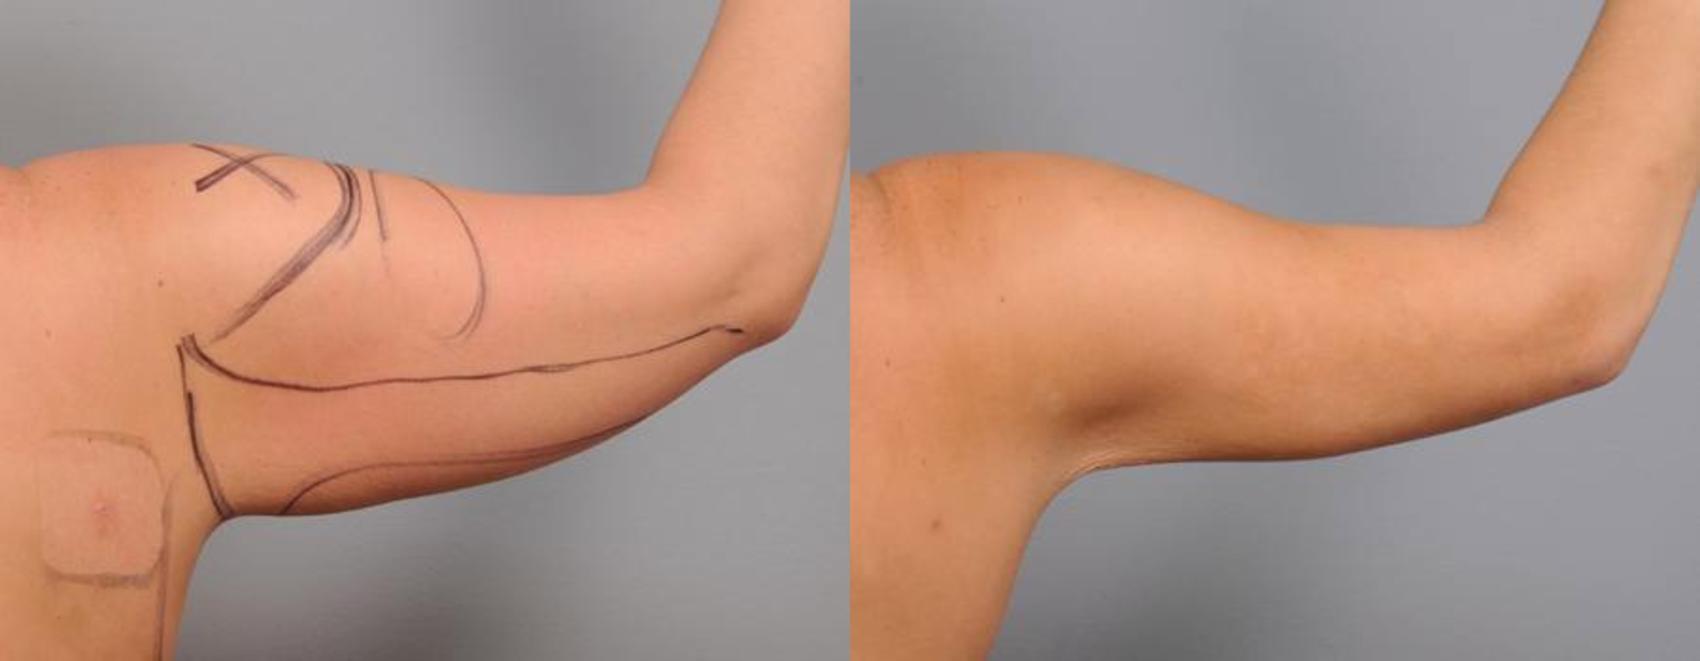 Smart lipo Arms Before & After 